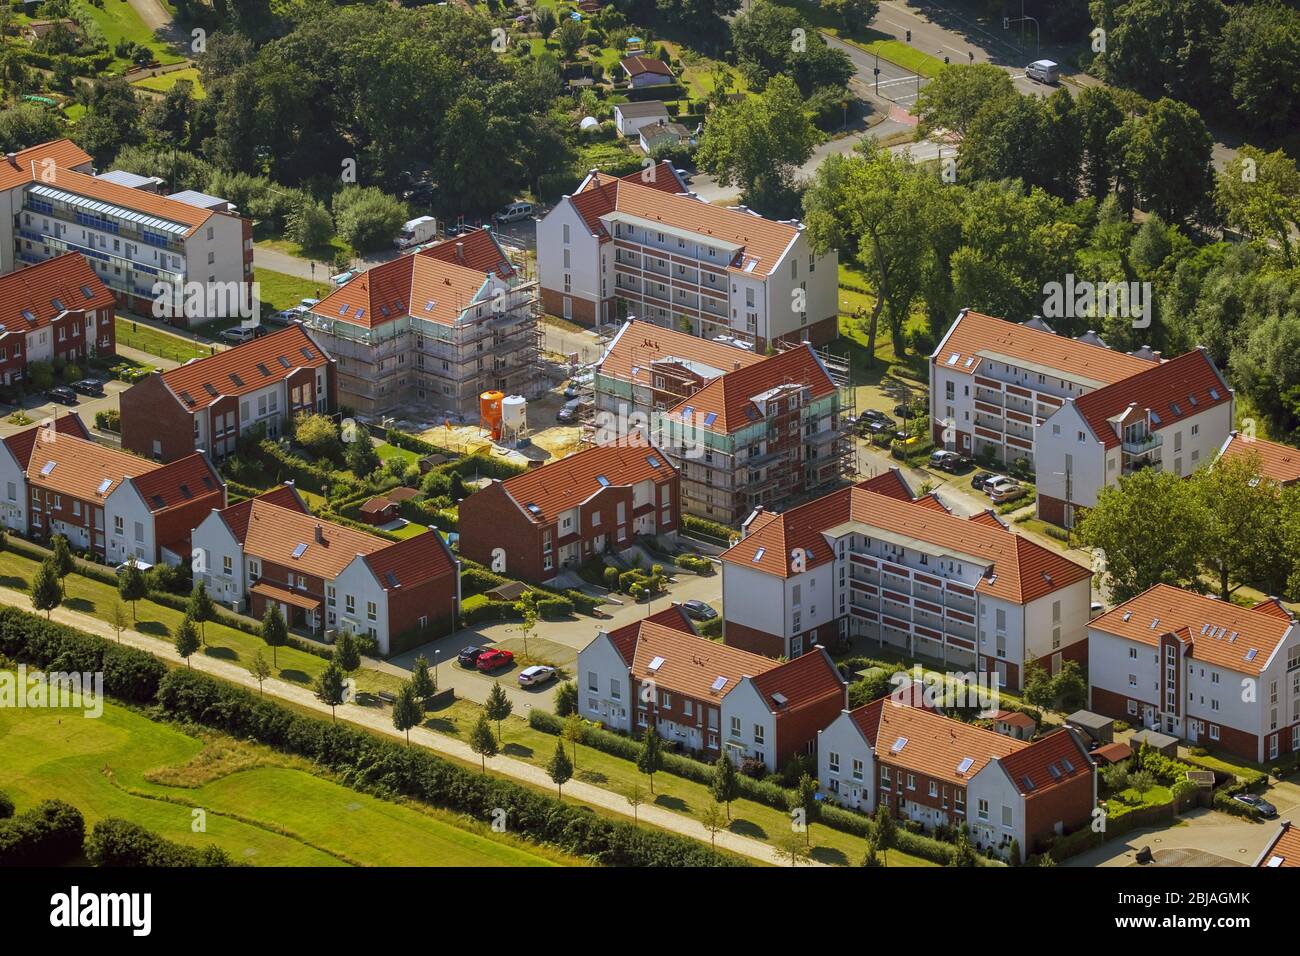 Residential area on Bowen garden next to the golf course at the Golf Club Schloss Horst e.V. at the former racetrack Horst in Gelsenkirchen, 19.07.2016, aerial view, Germany, North Rhine-Westphalia, Ruhr Area, Gelsenkirchen Stock Photo